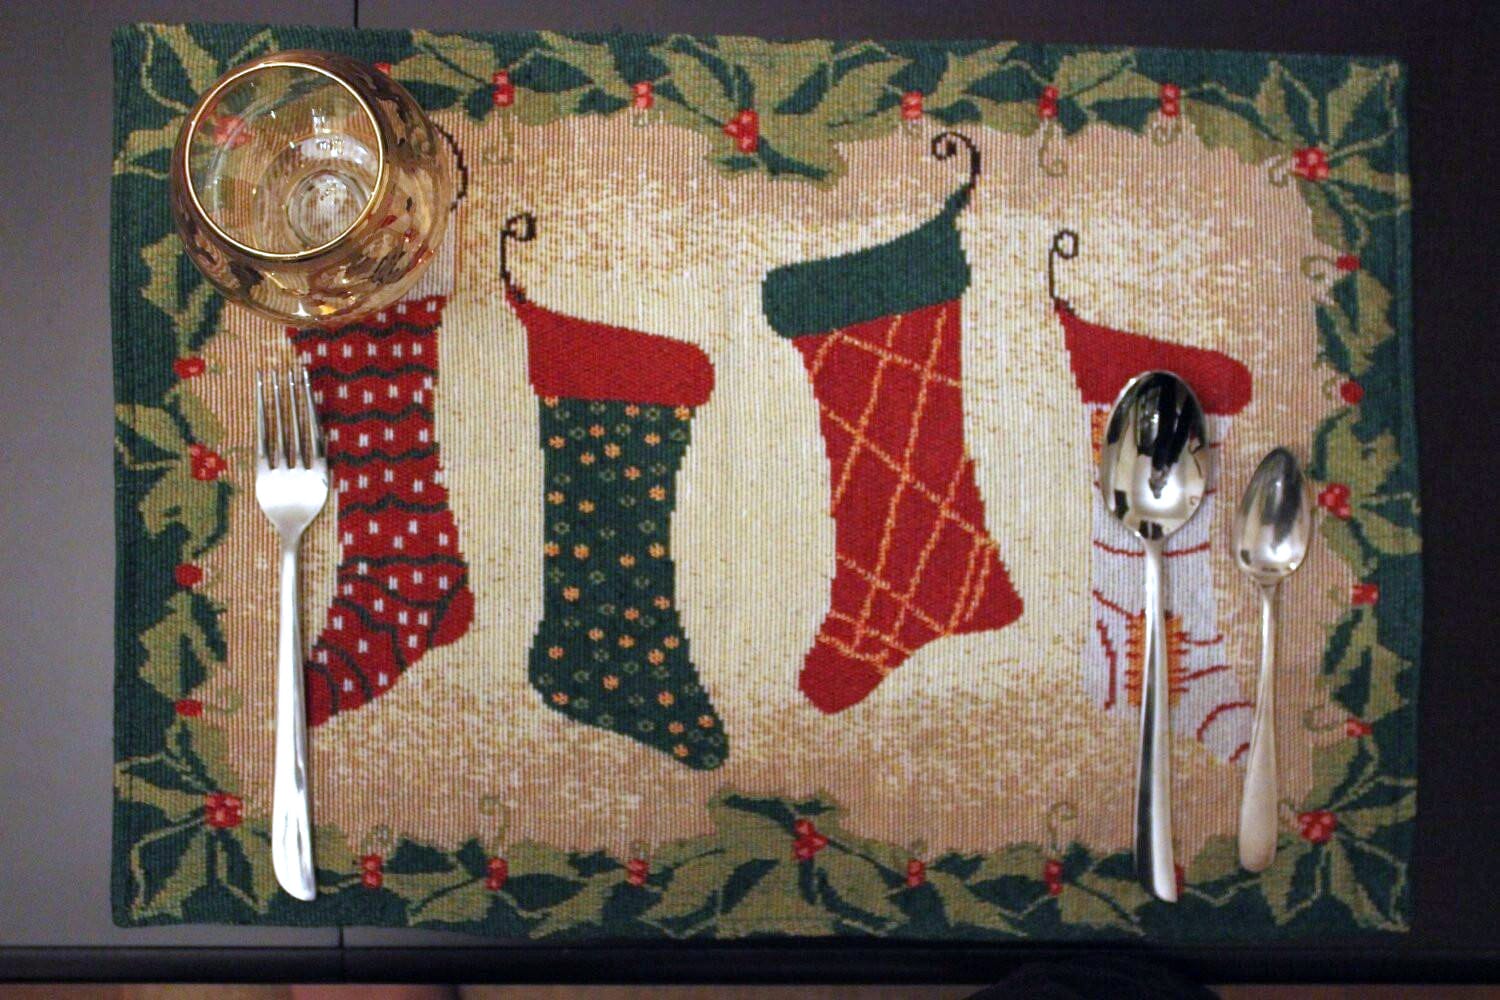 Tache Festive Hang My Stockings By the Fireplace Placemat Set of 4 (12910PM) - Tache Home Fashion